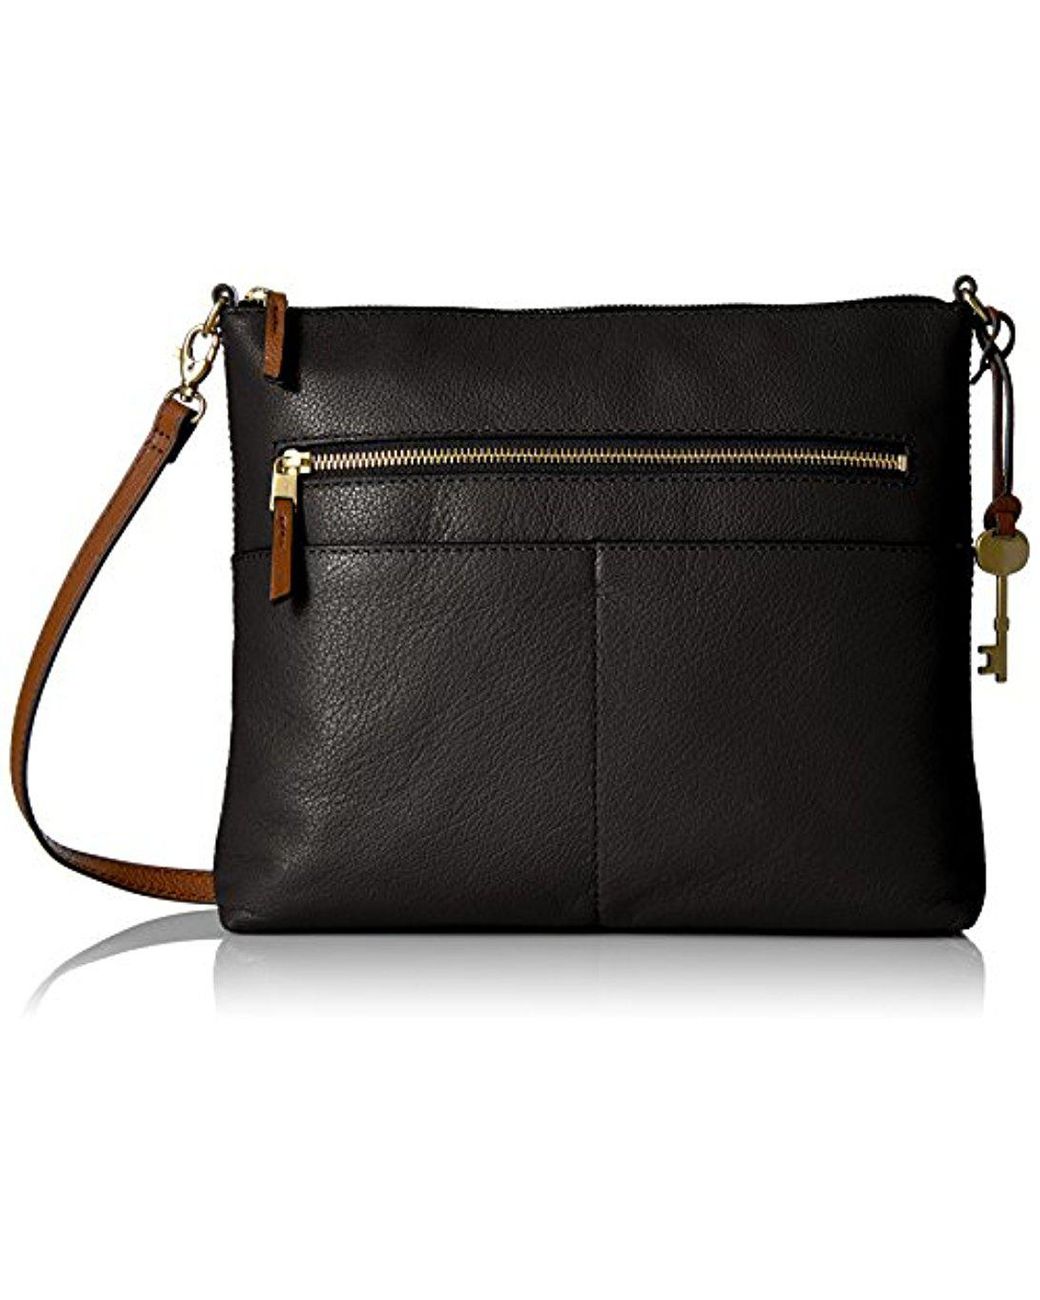 Fossil Fiona Large Crossbody Bag in Black | Lyst